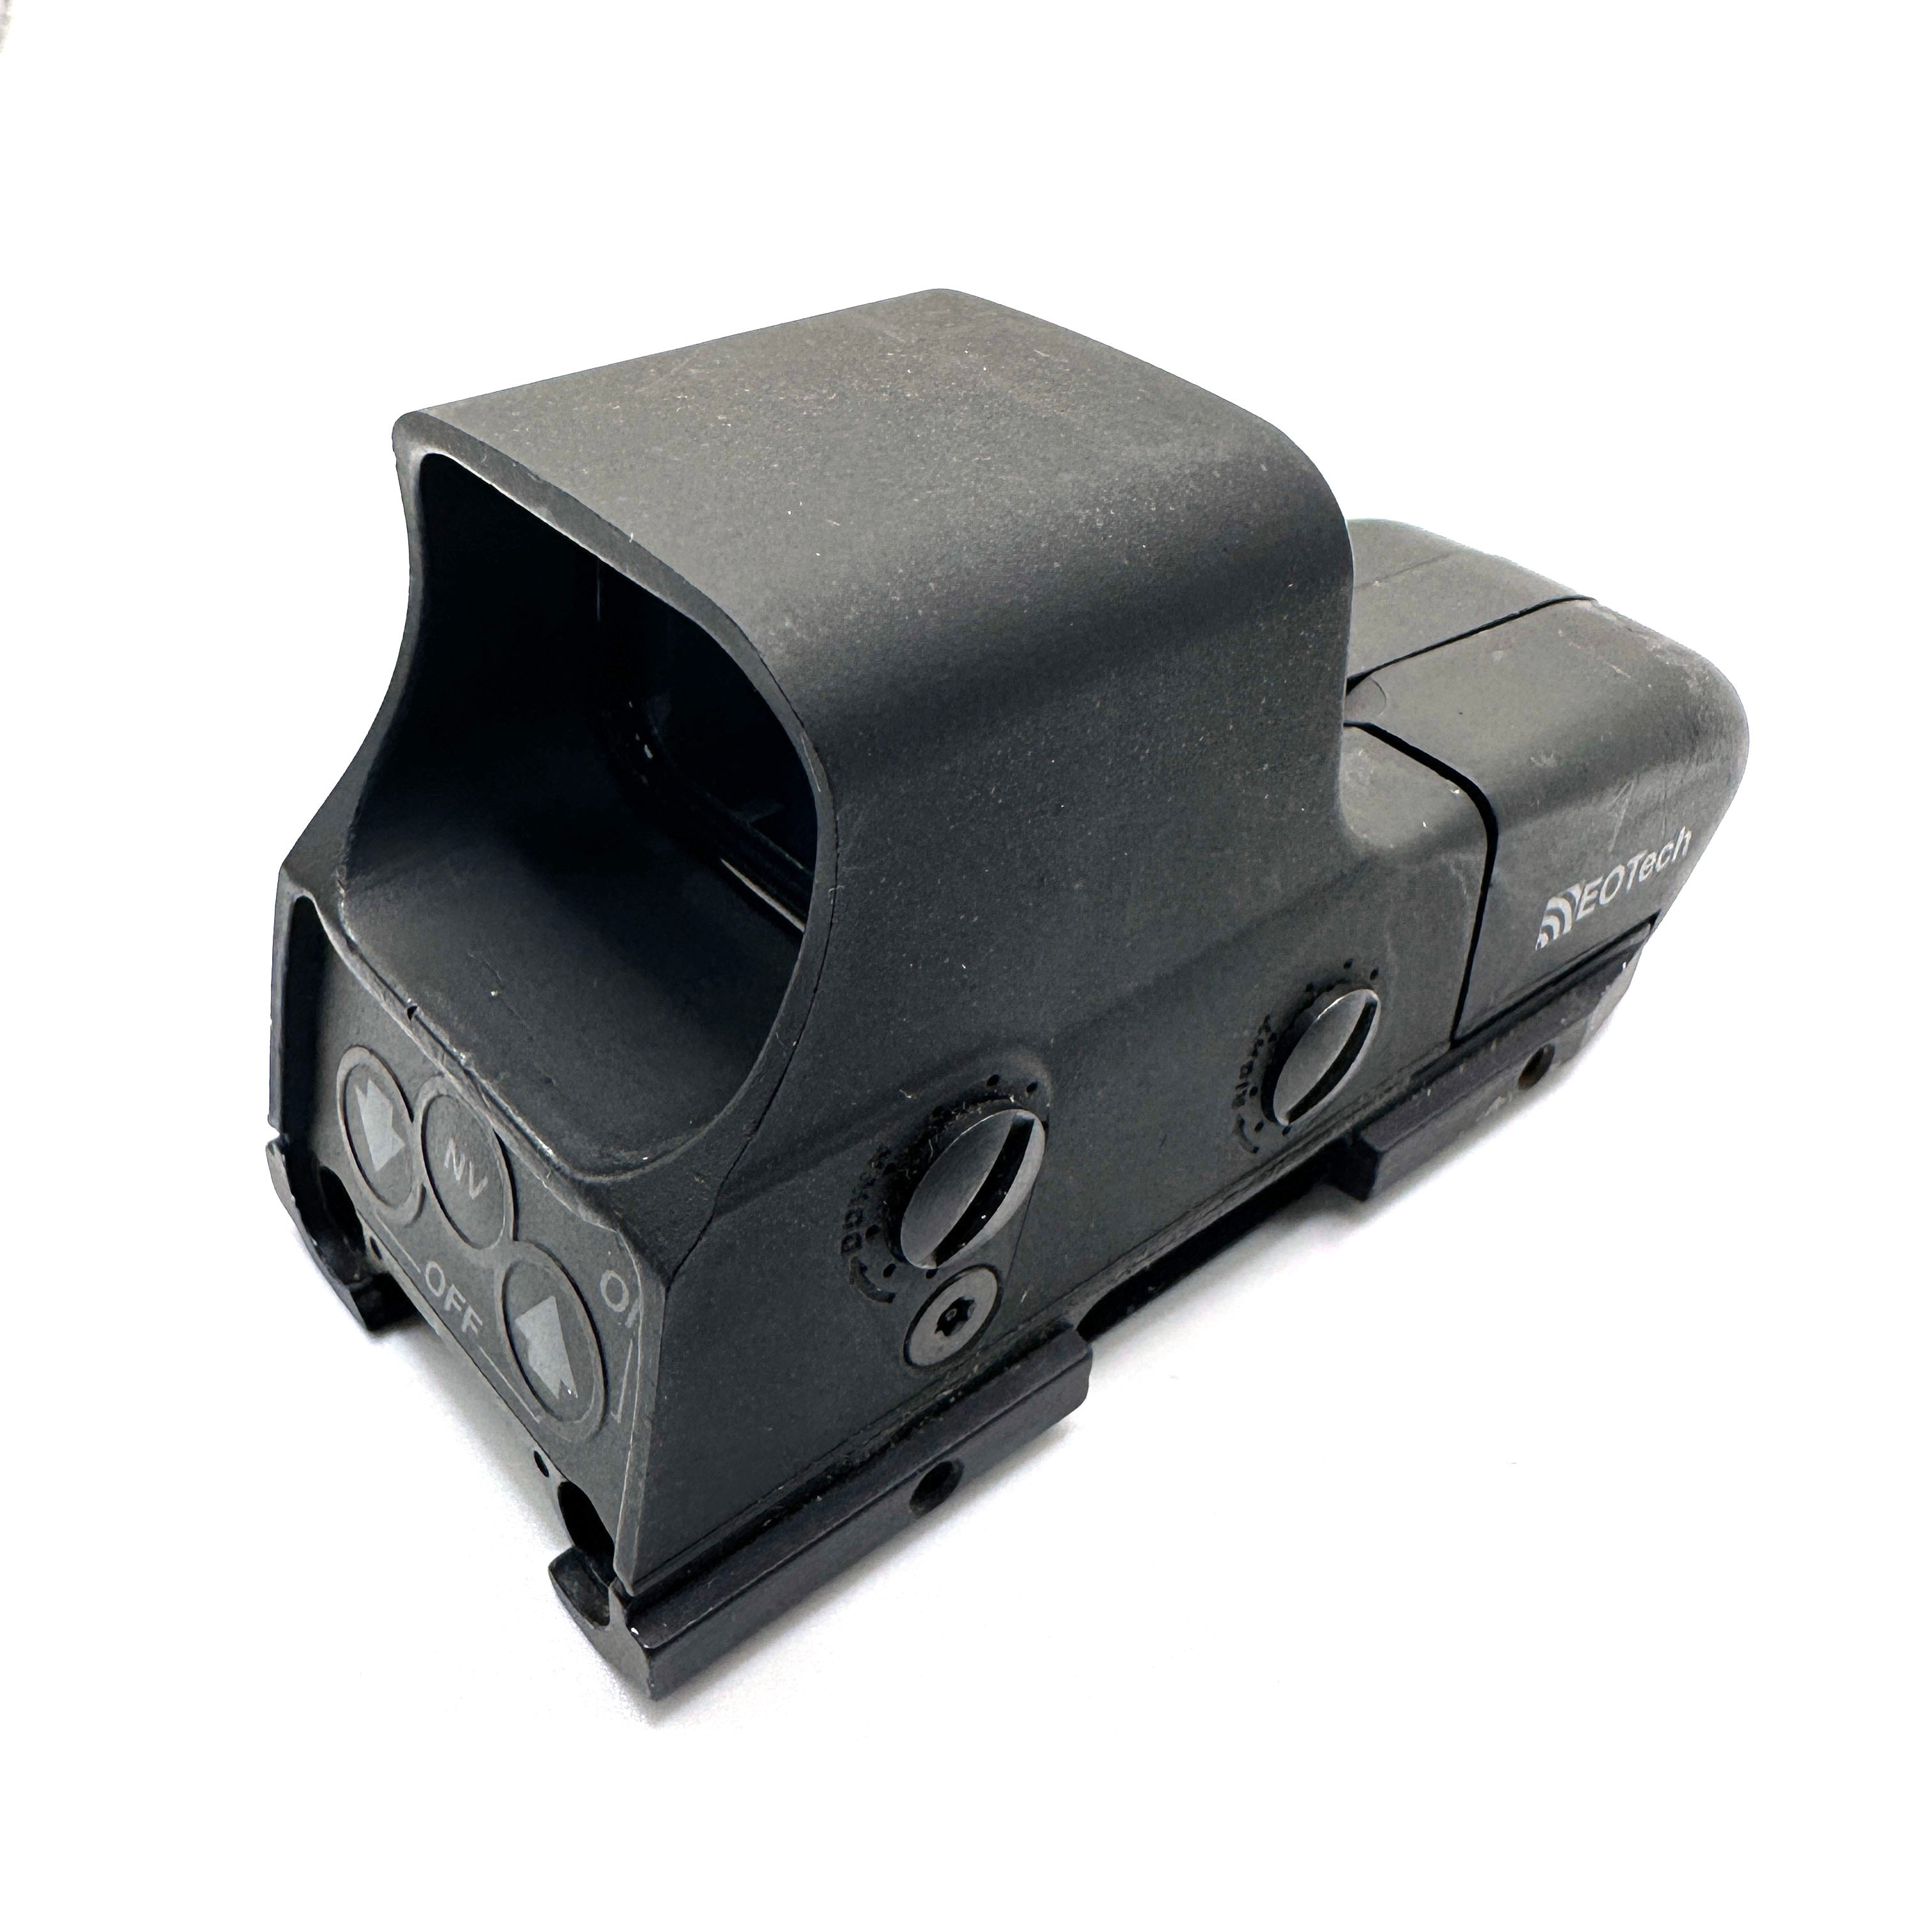 Eotech 551 Holographic Optical Sight